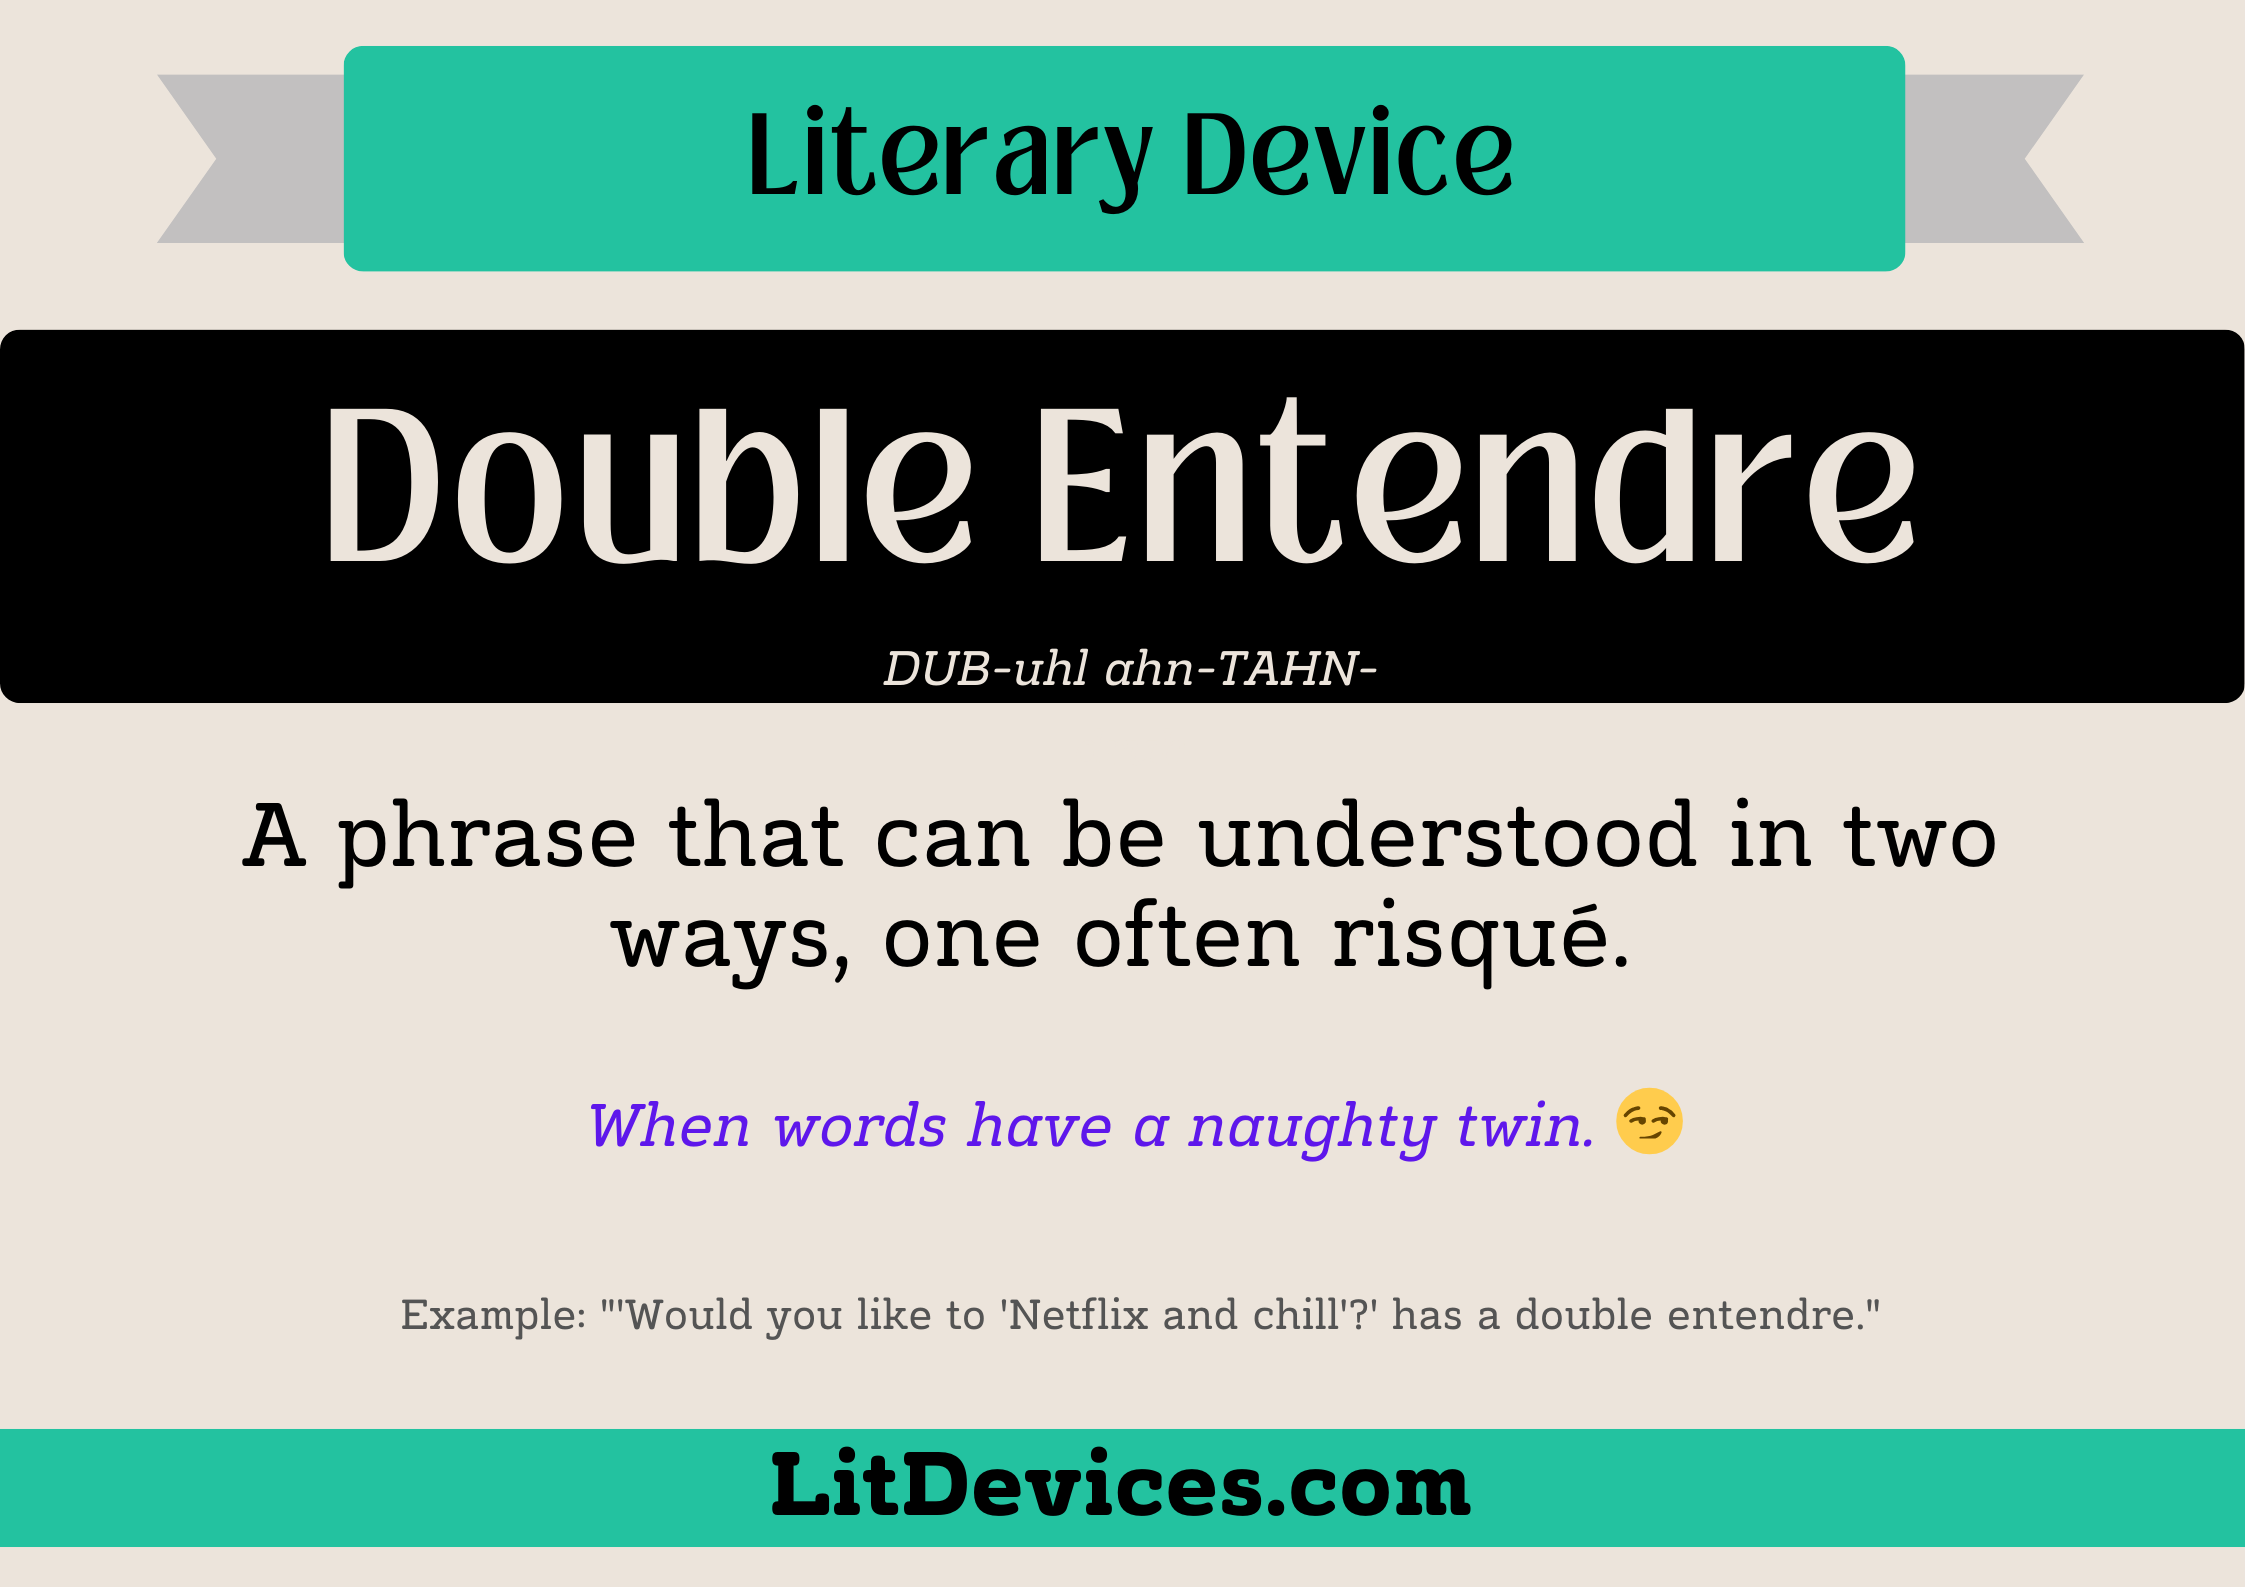 double entendre literary device